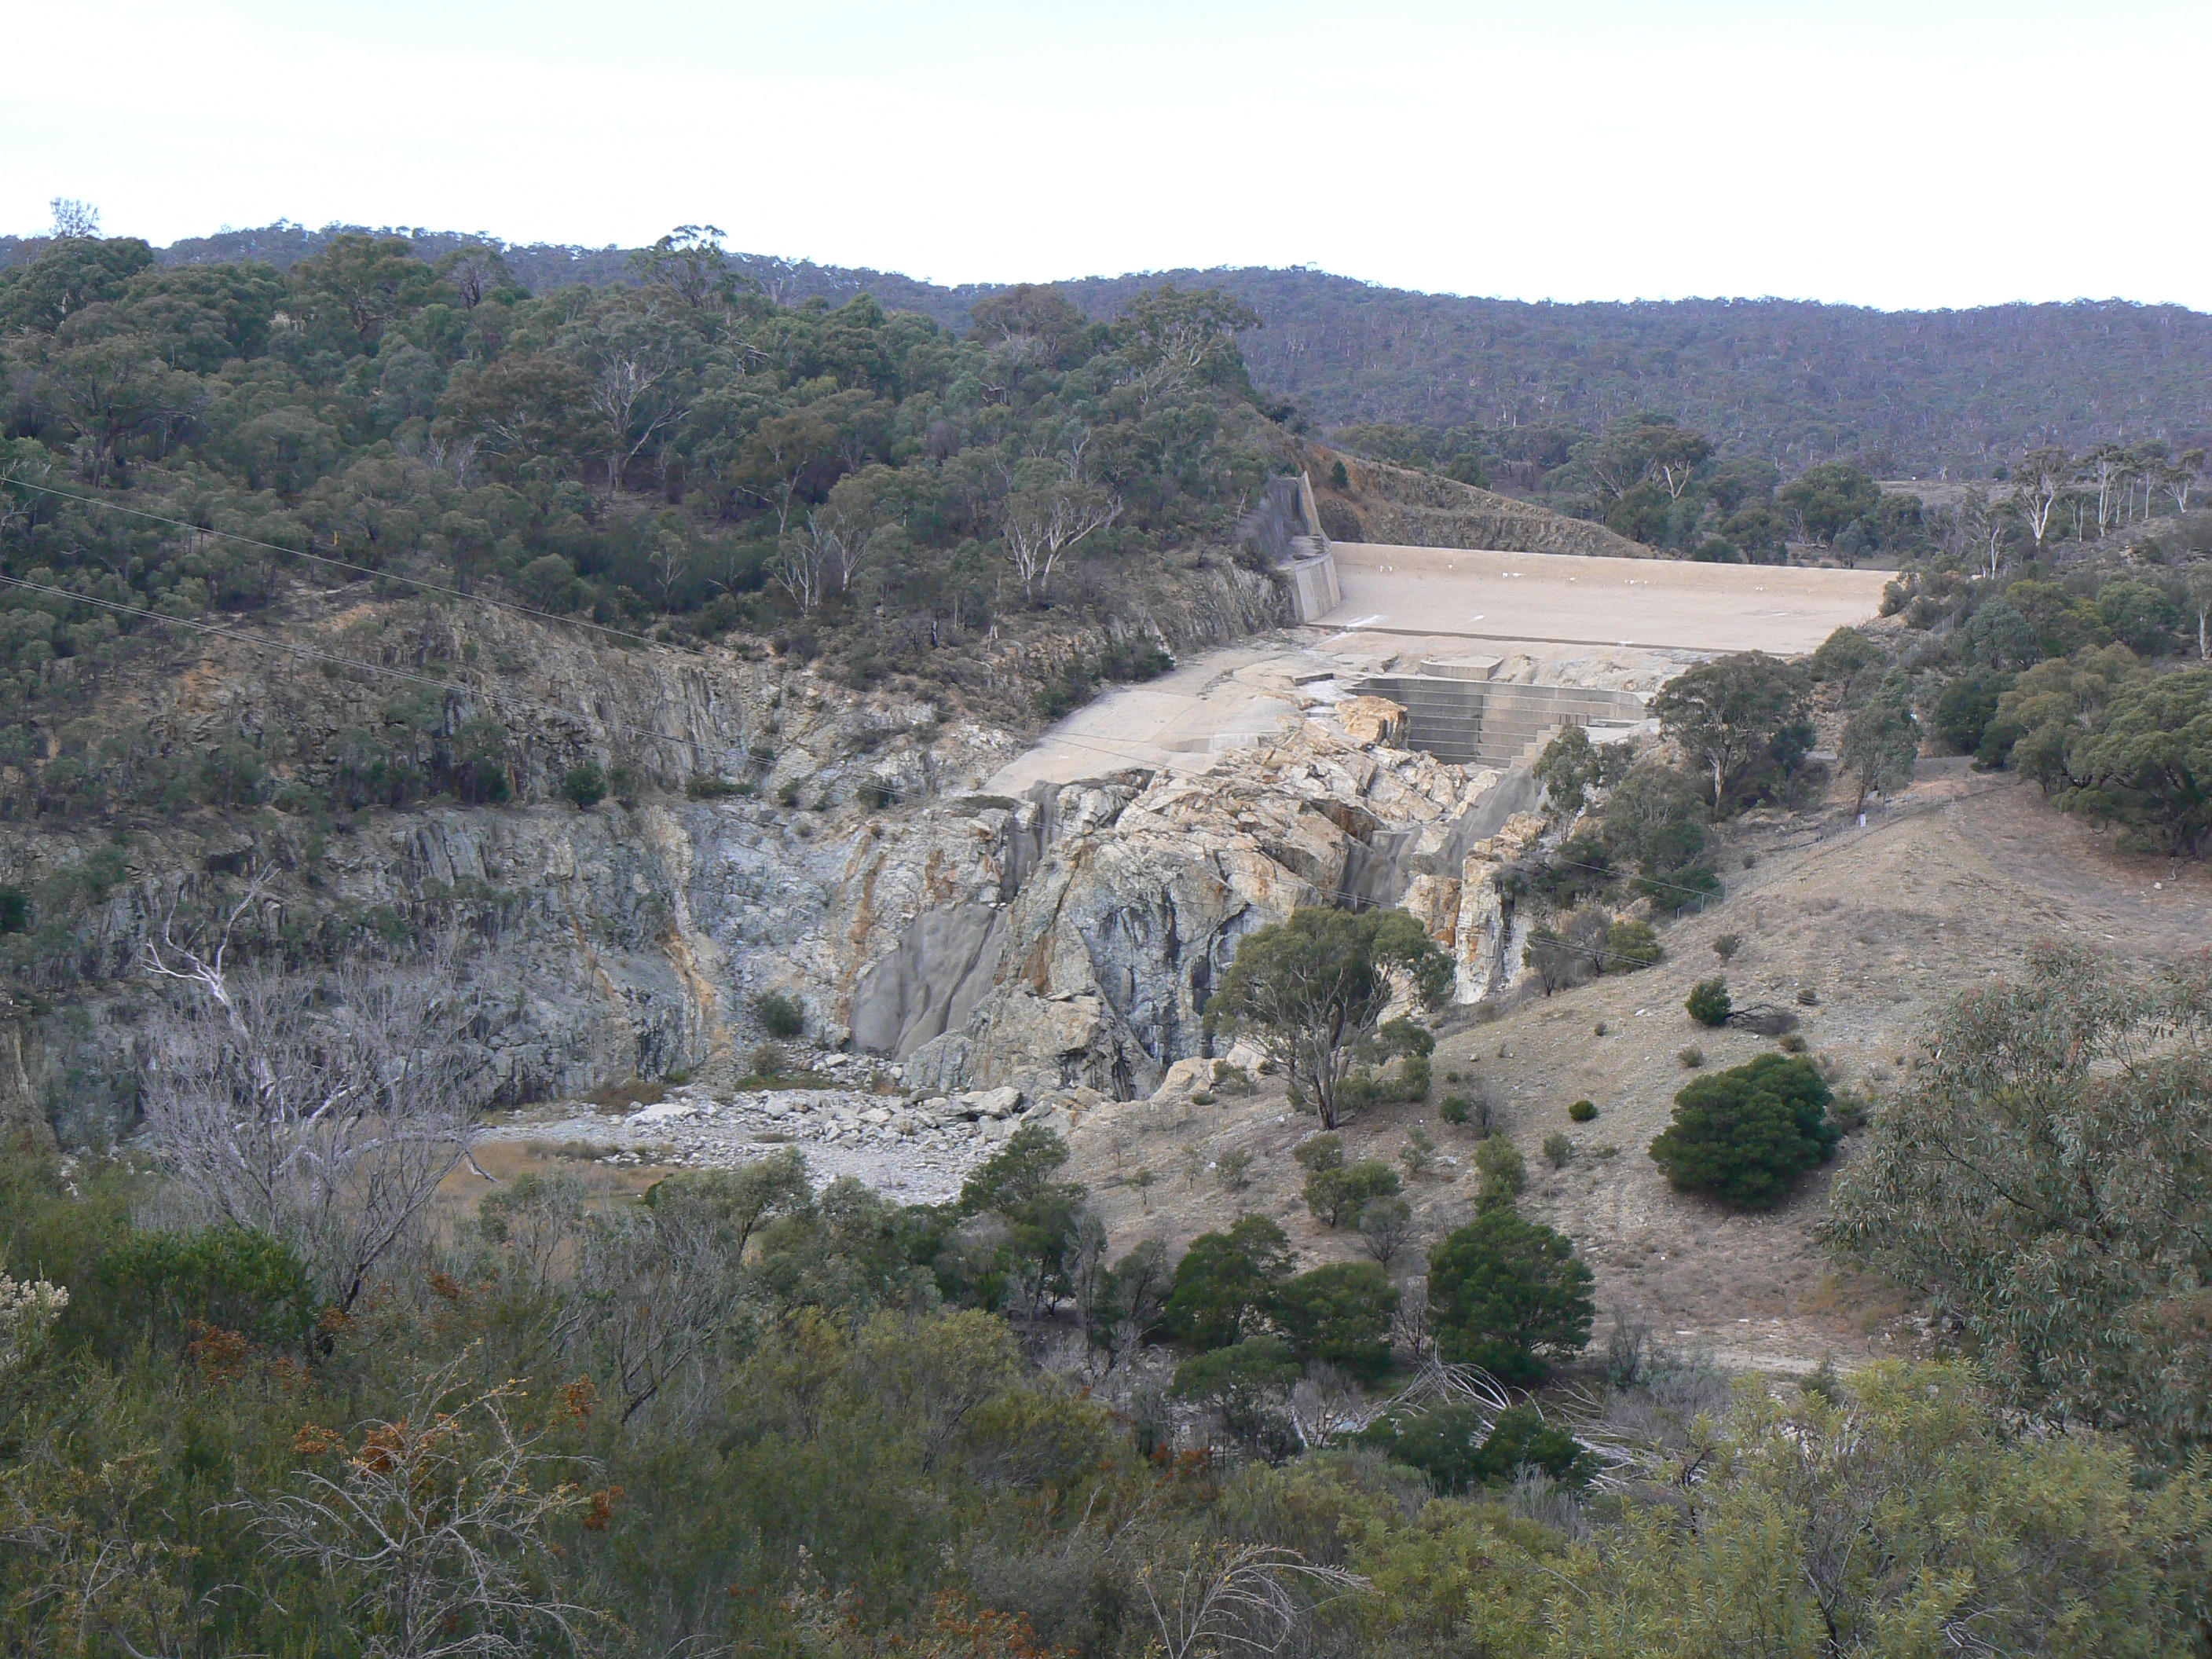 The old eroded spillway